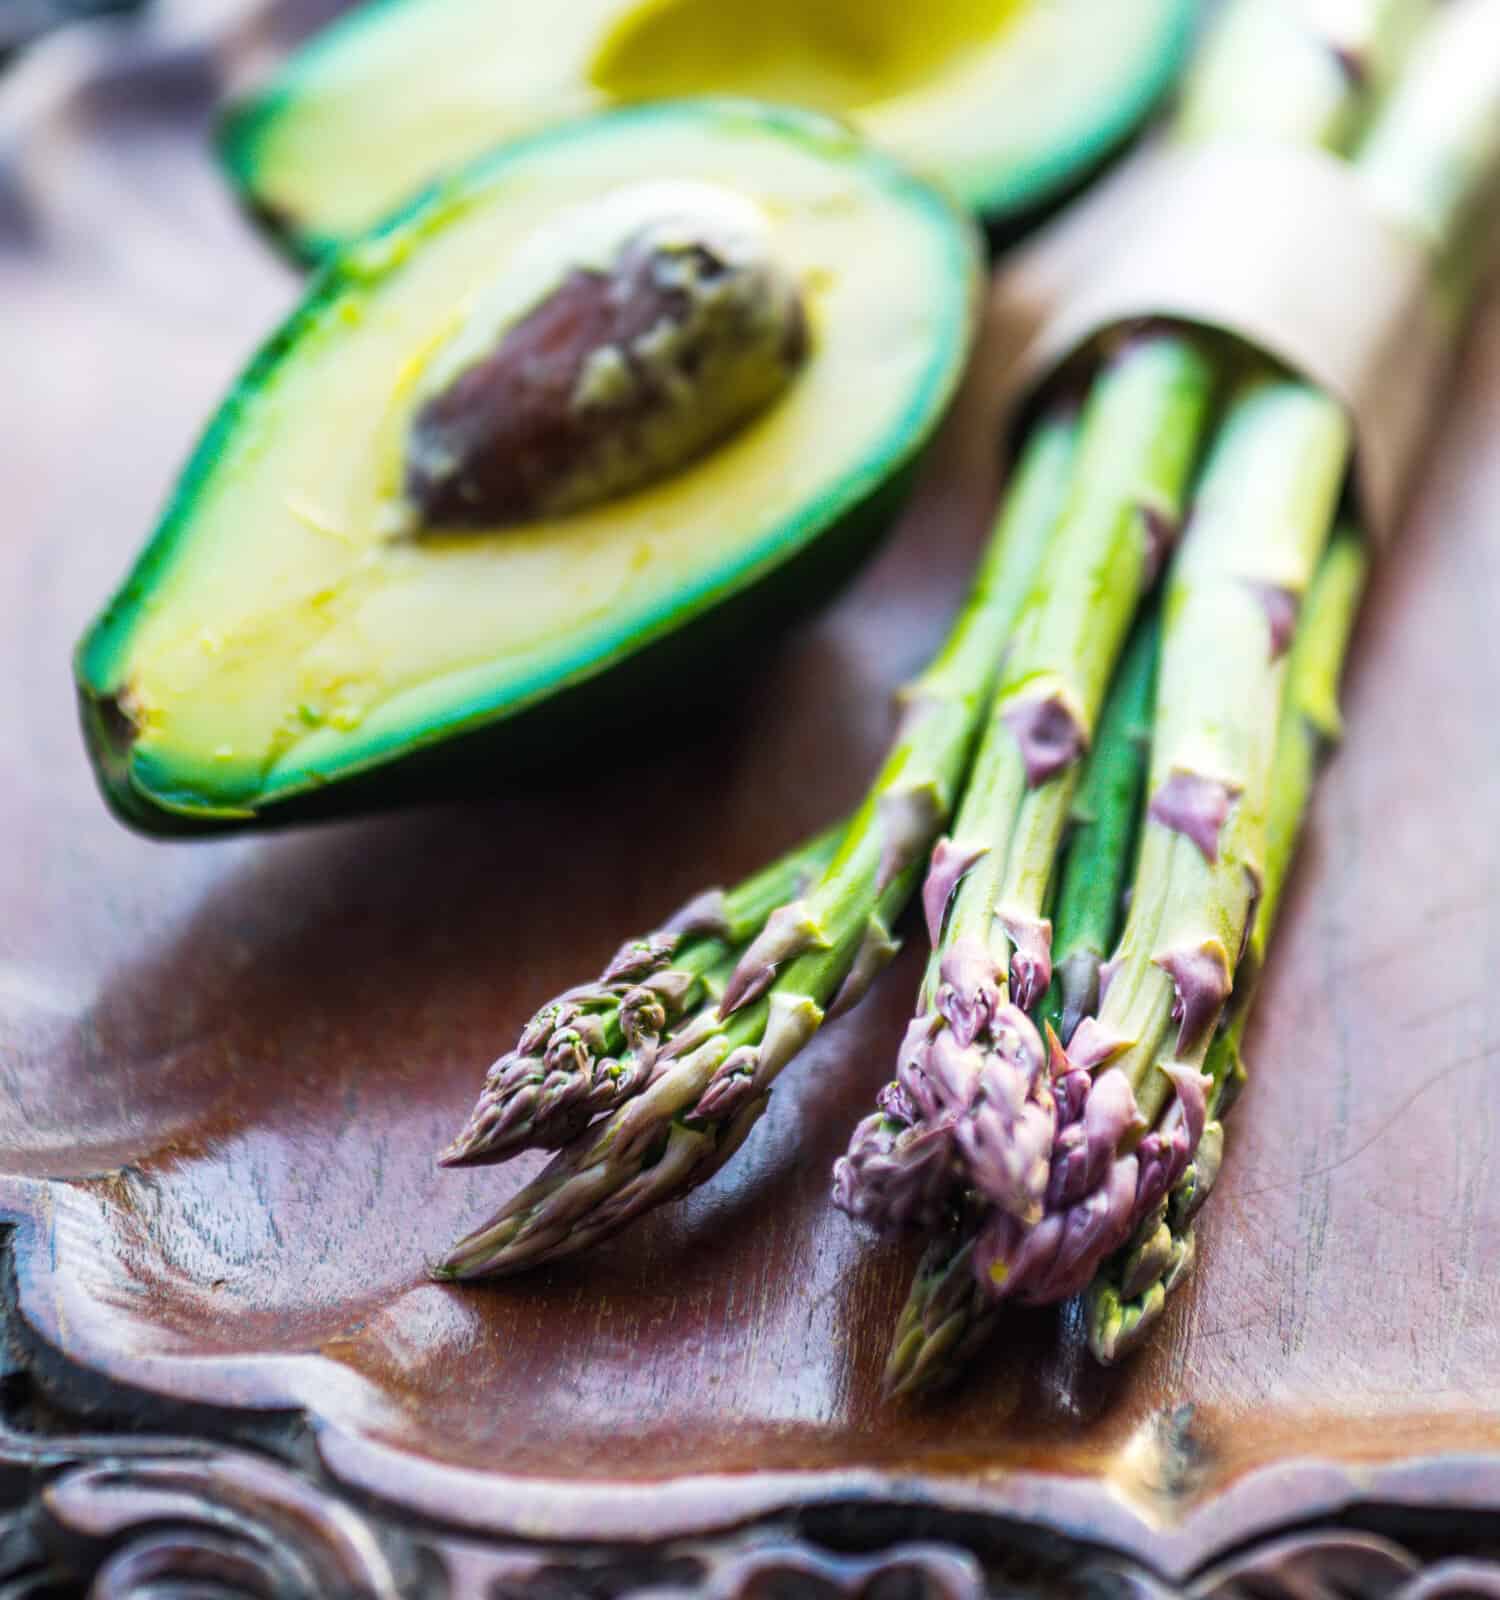 Bunch of fresh asparagus and avocado on wooden table